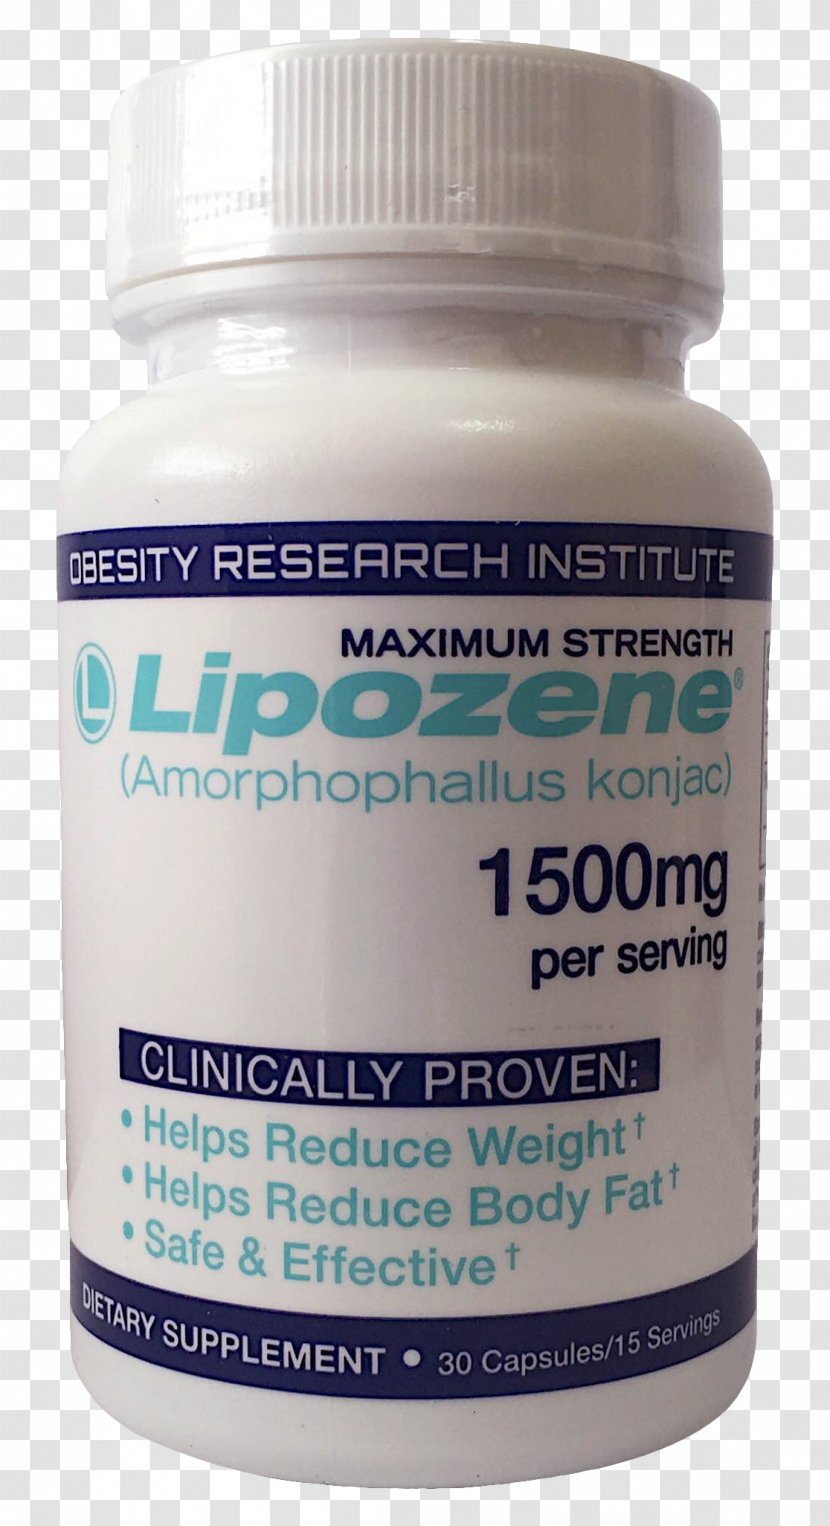 Dietary Supplement Weight Loss Lipozene Anti-obesity Medication Glucomannan - Liquid - Truth In Advertising Transparent PNG